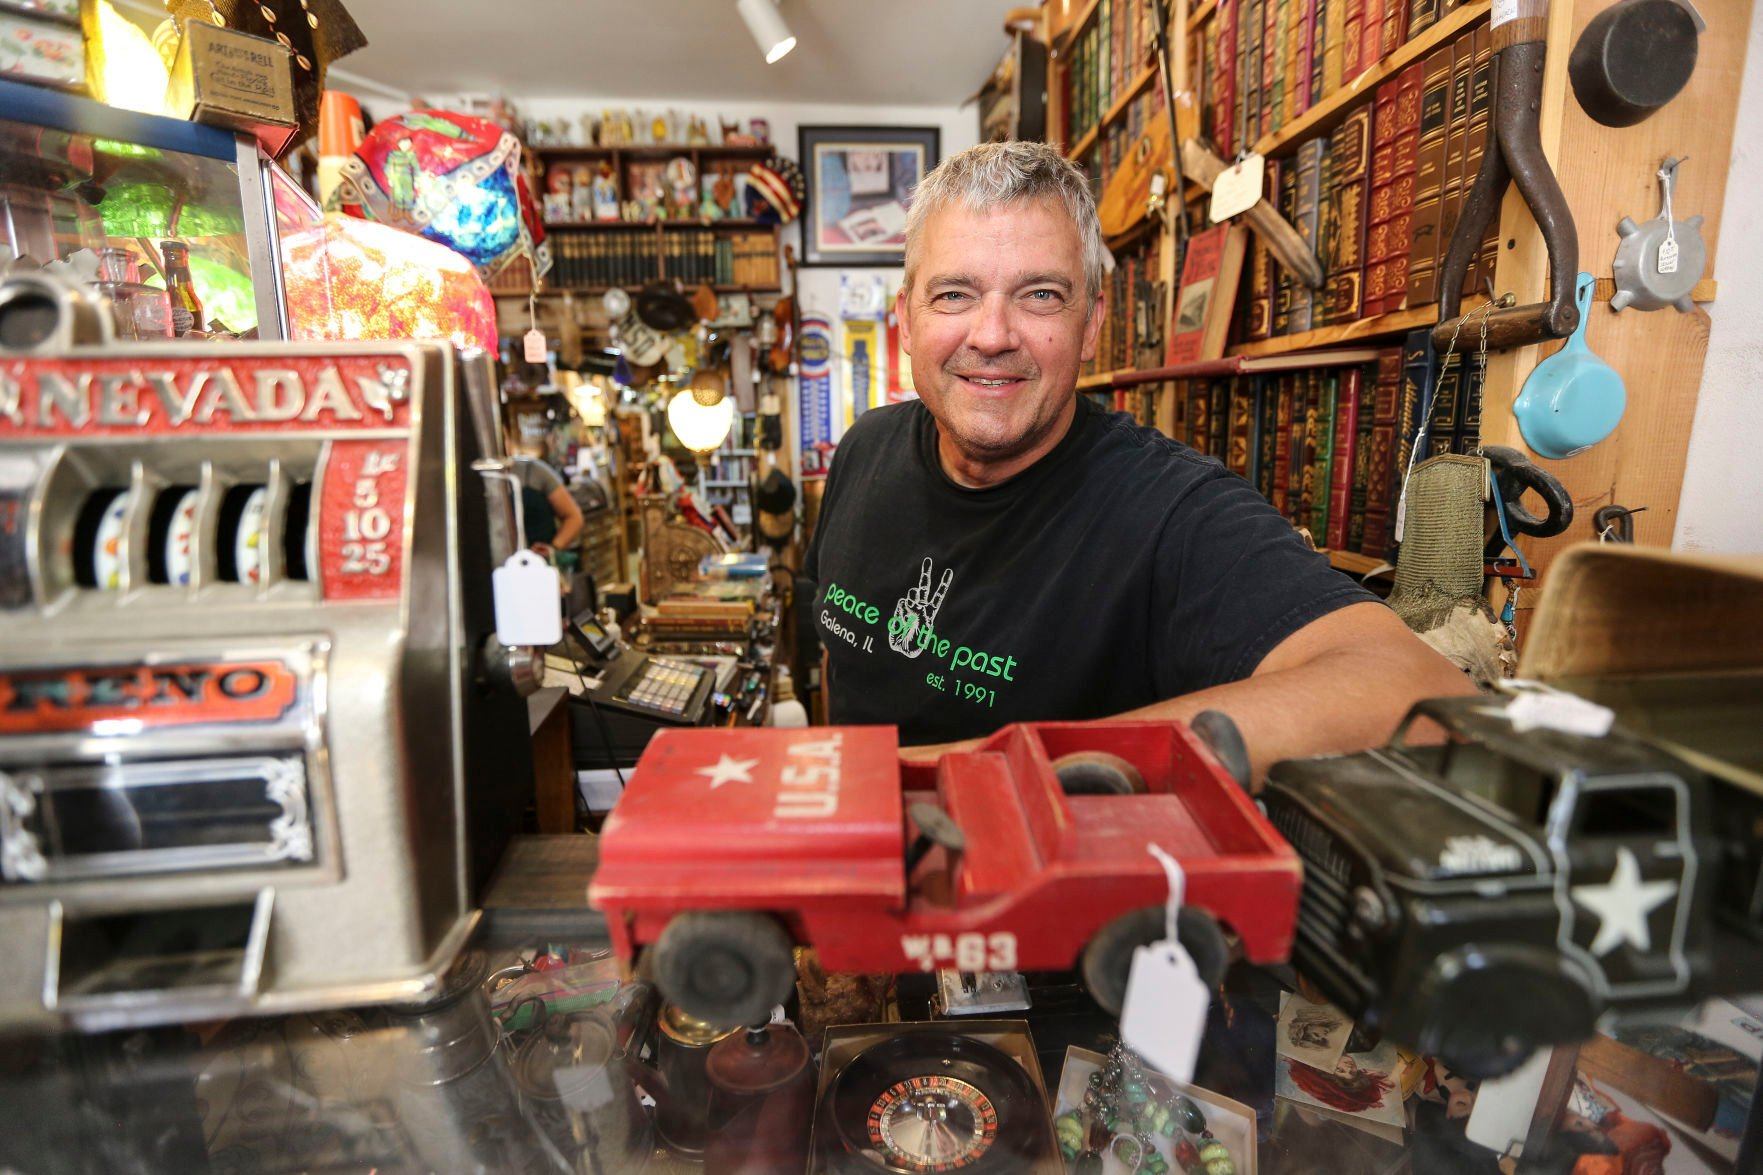 Bill Karberg, co-owner of Peace of the Past, has had a successful career in antiques. His Galena, Ill., store has been in business for 31 years and in 2013 opened another location.    PHOTO CREDIT: Dave Kettering